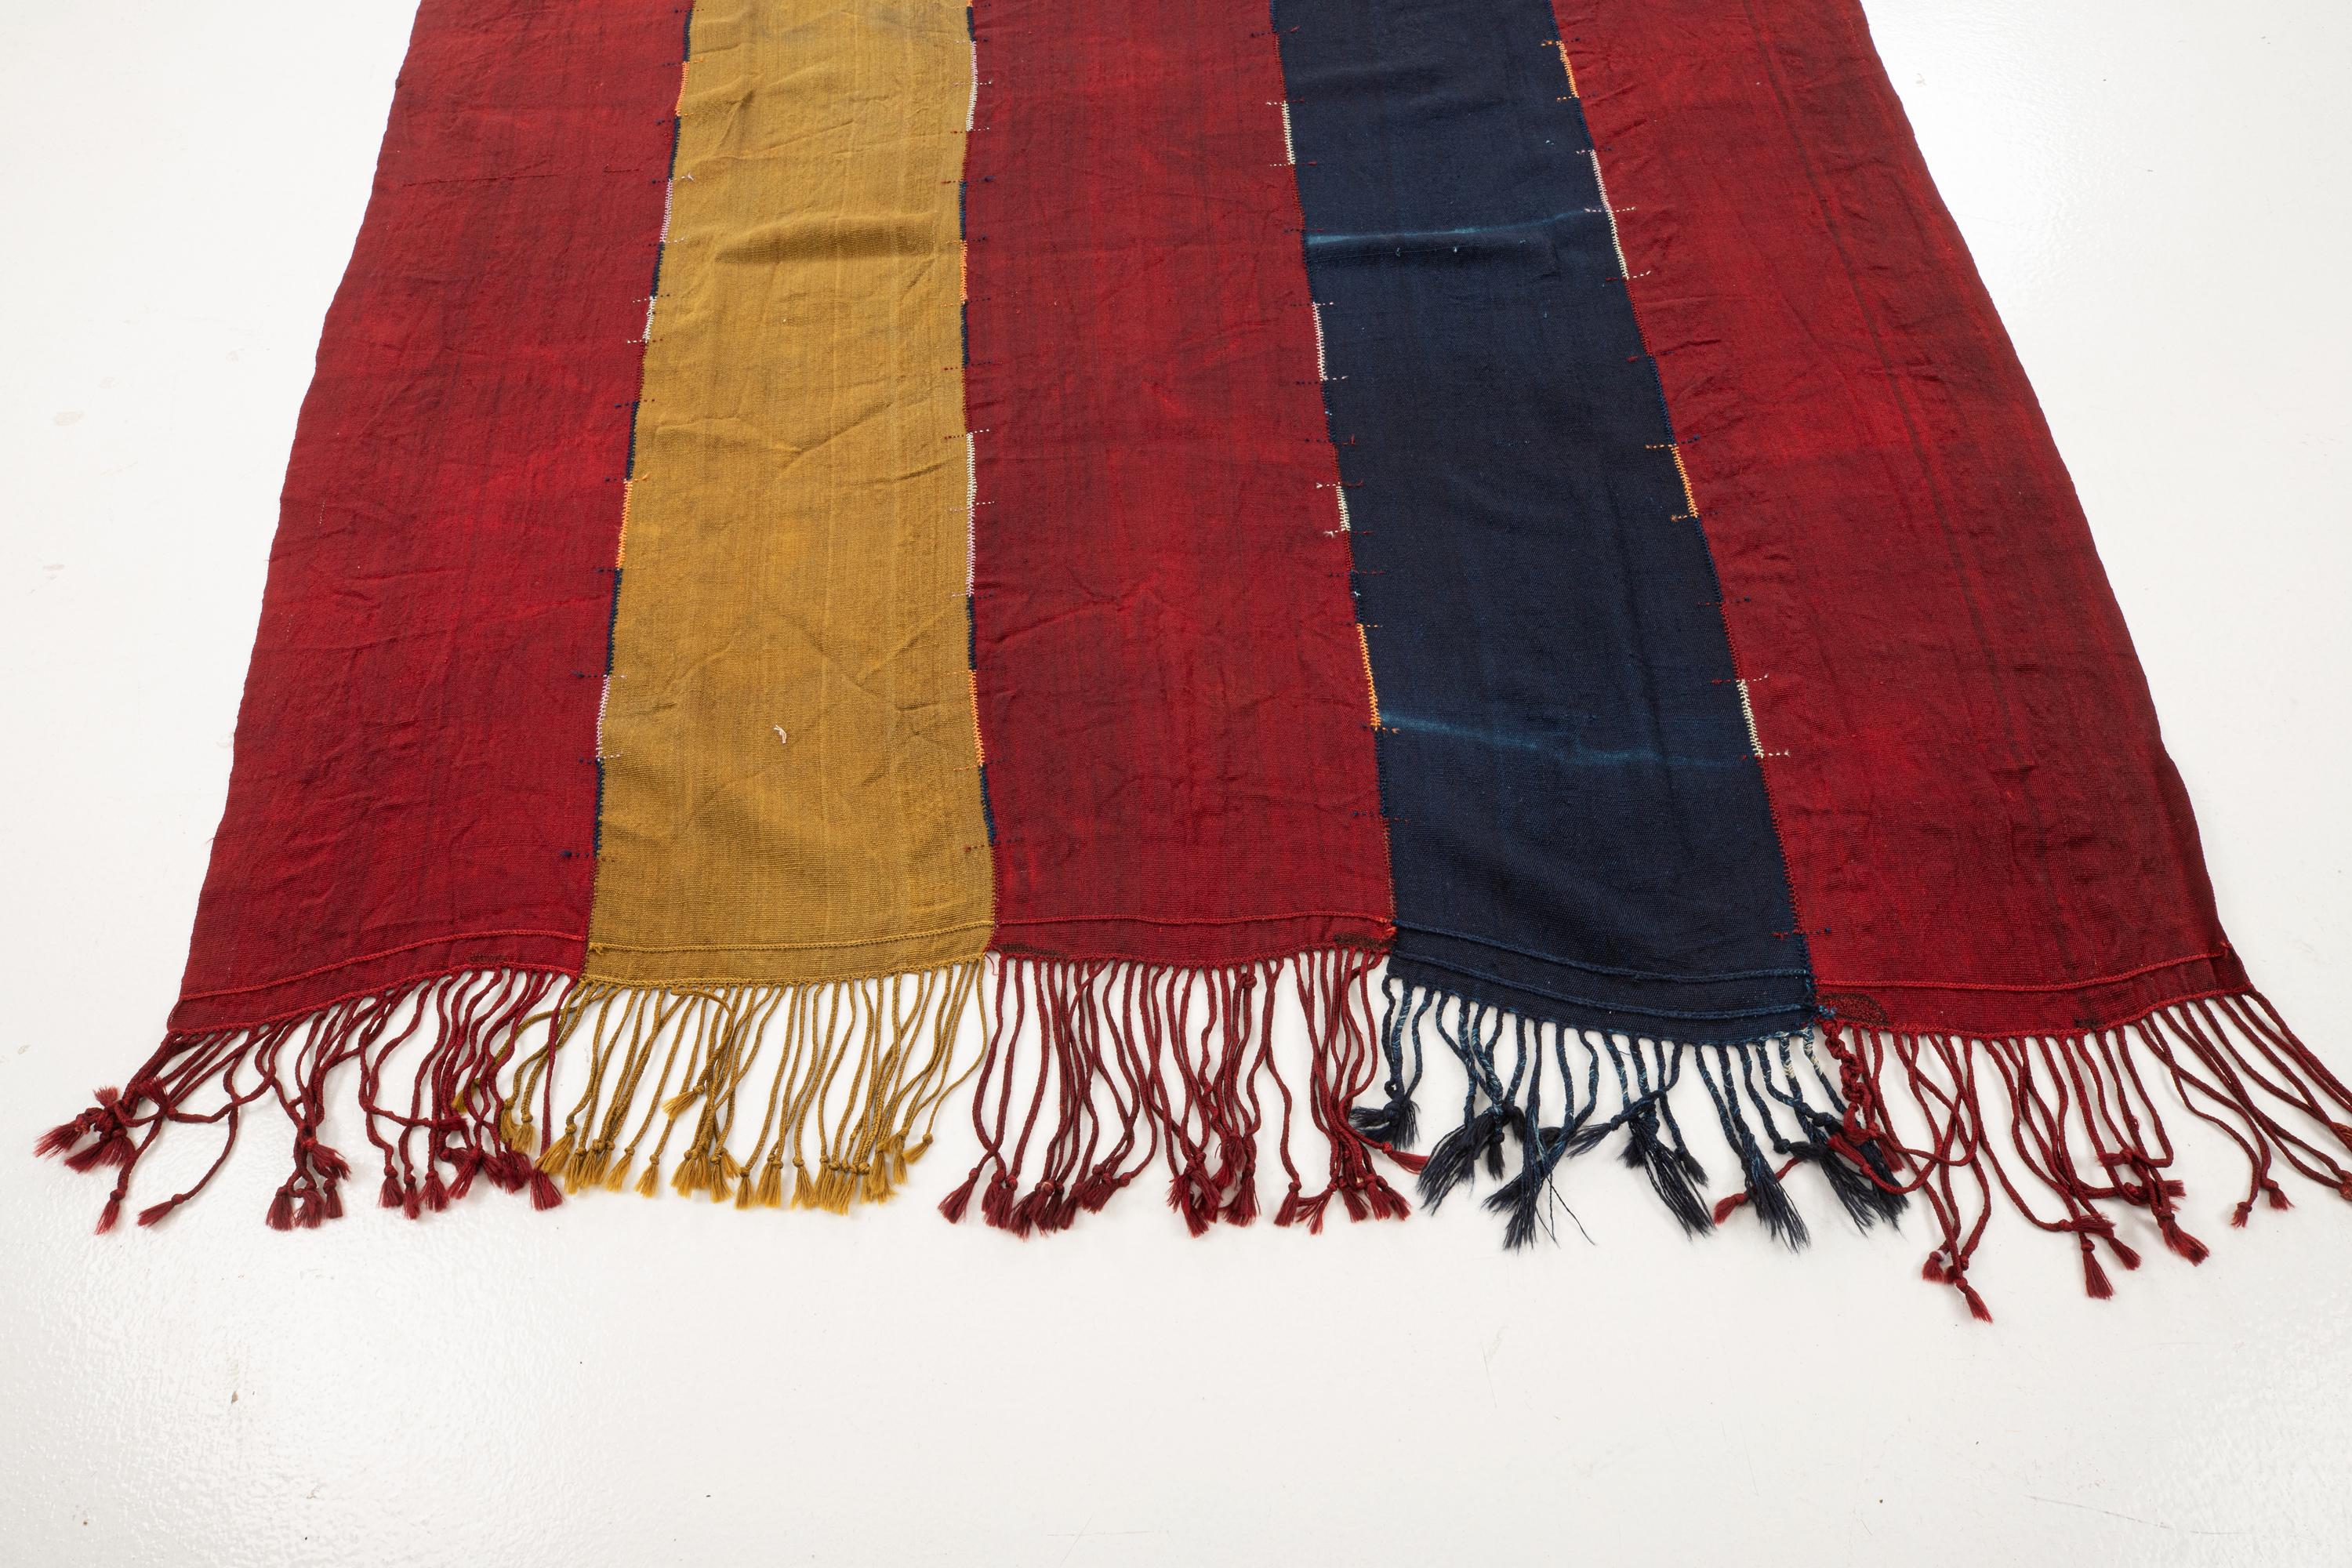 This is a fine weaving in wool that can either be used on the floor or on a wall or a caoch.
Deep well saturated colors.